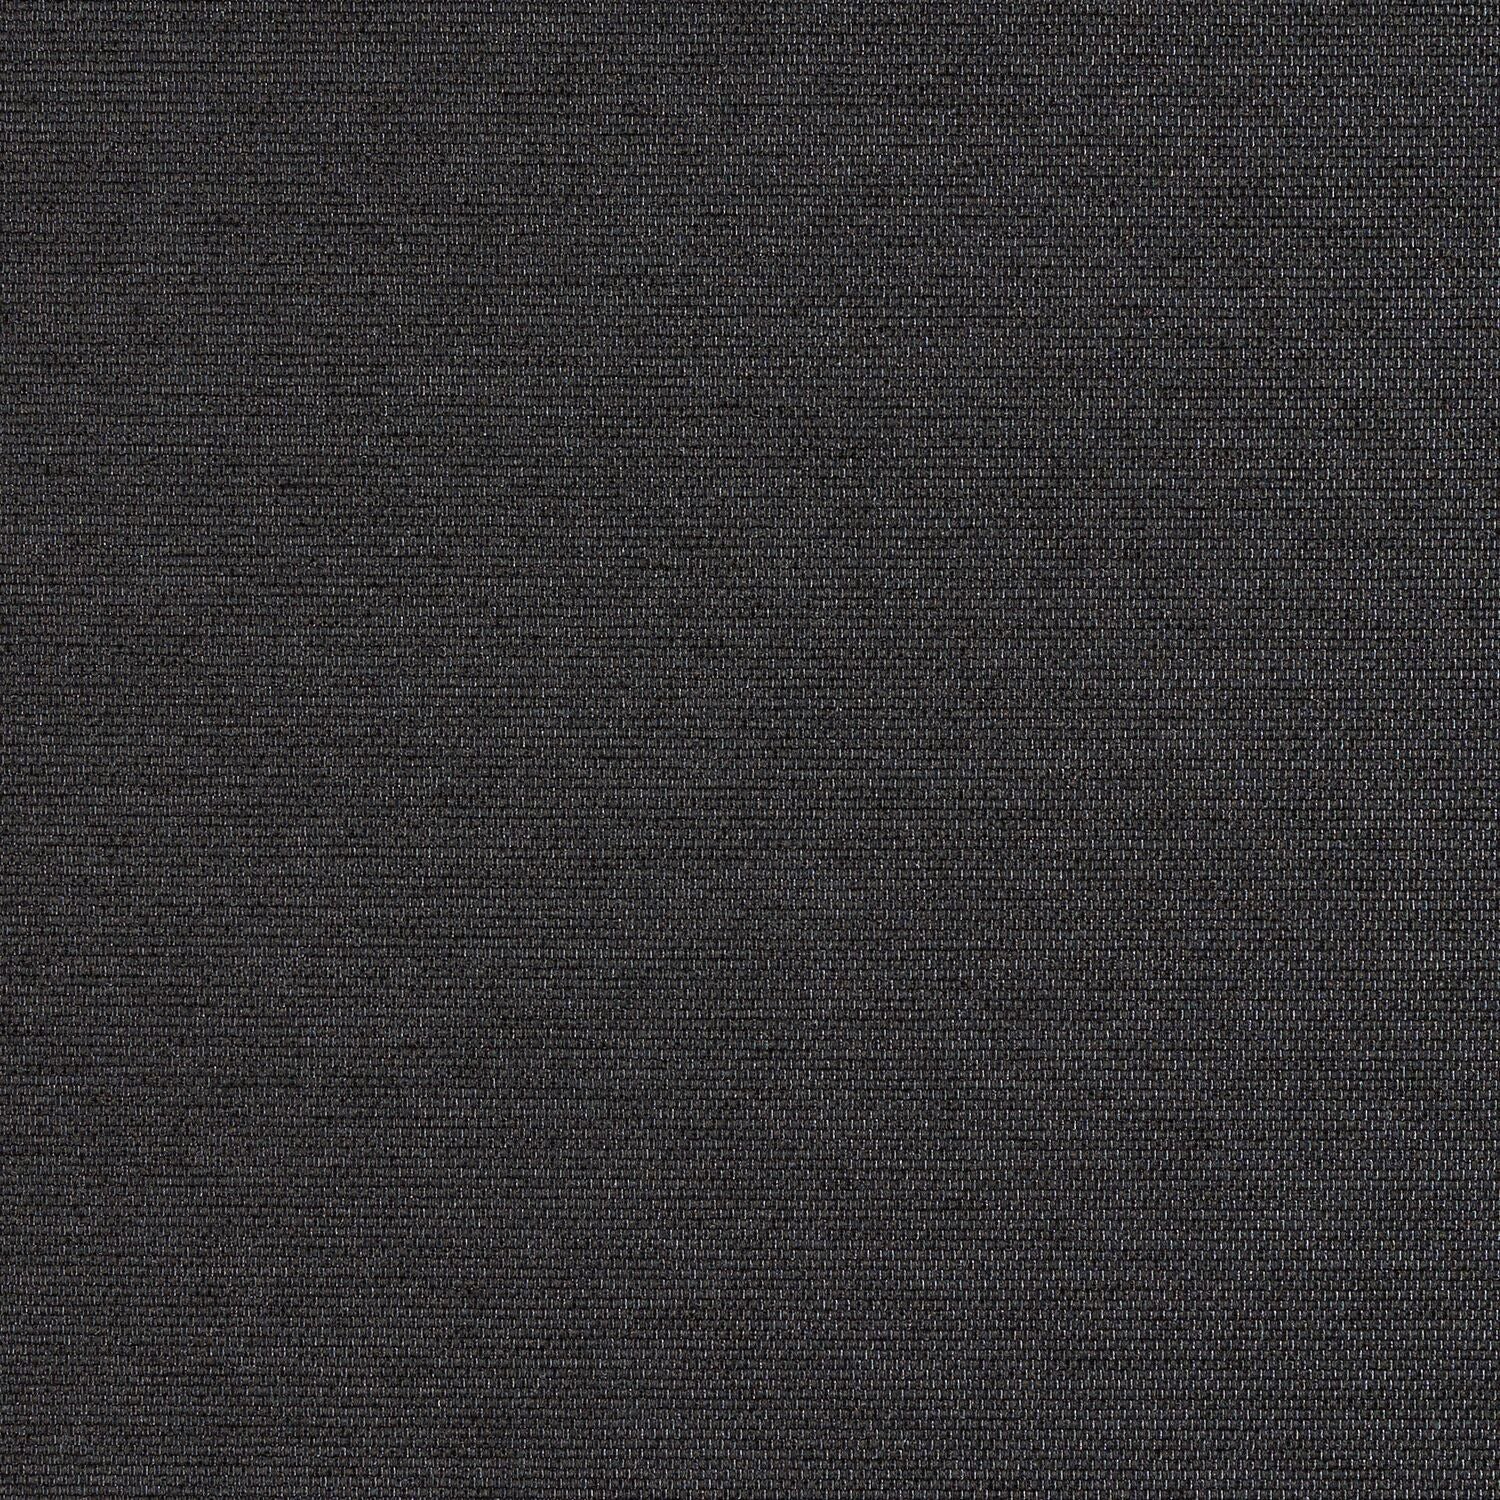 Actuate - Spectral - 4073 - 02 - Half Yard